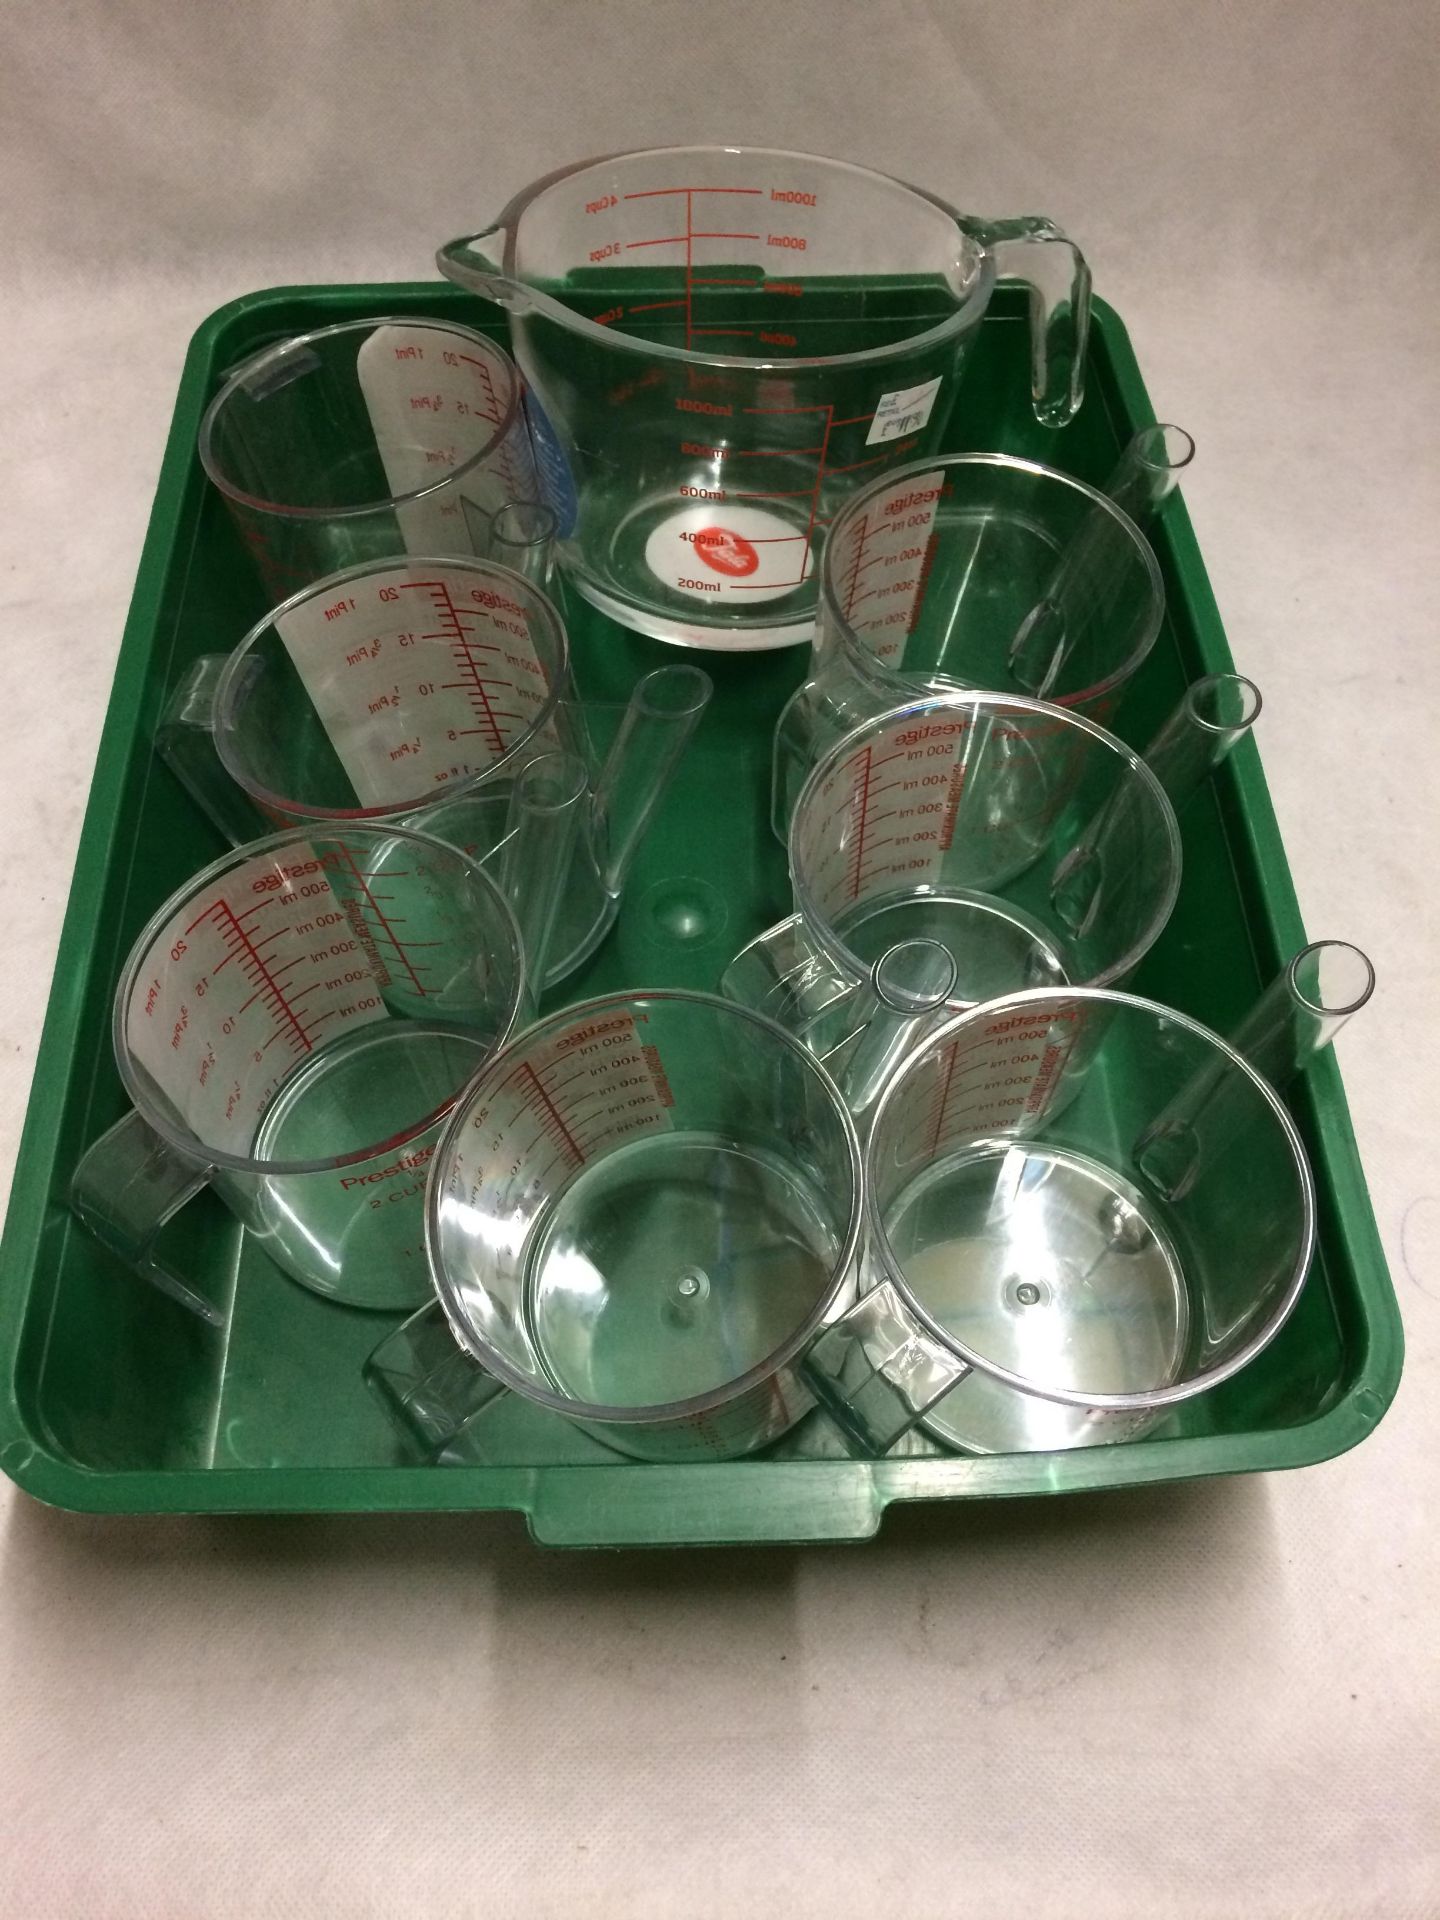 8 x plastic measuring jugs and 1 x glass